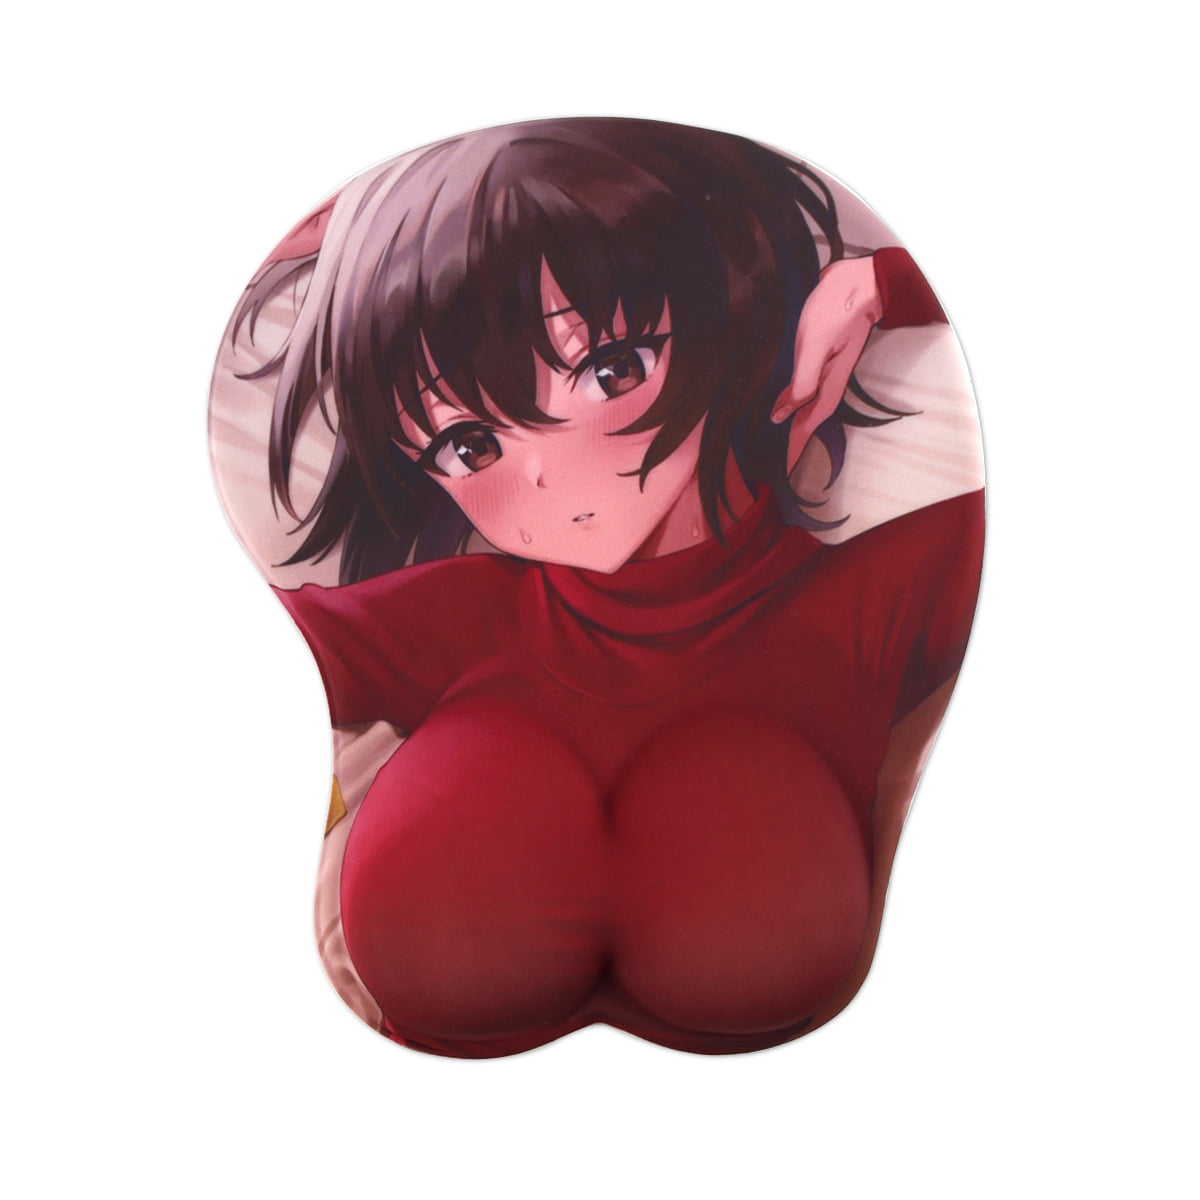 Anime Girls Braces Porn - Cute Soft Sexy Cartoon Girl 3D Big Breast Boobs Silicone Wrist Rest Support  Mouse Pad Mat Gaming Mousepad-RJ-027 - Walmart.com